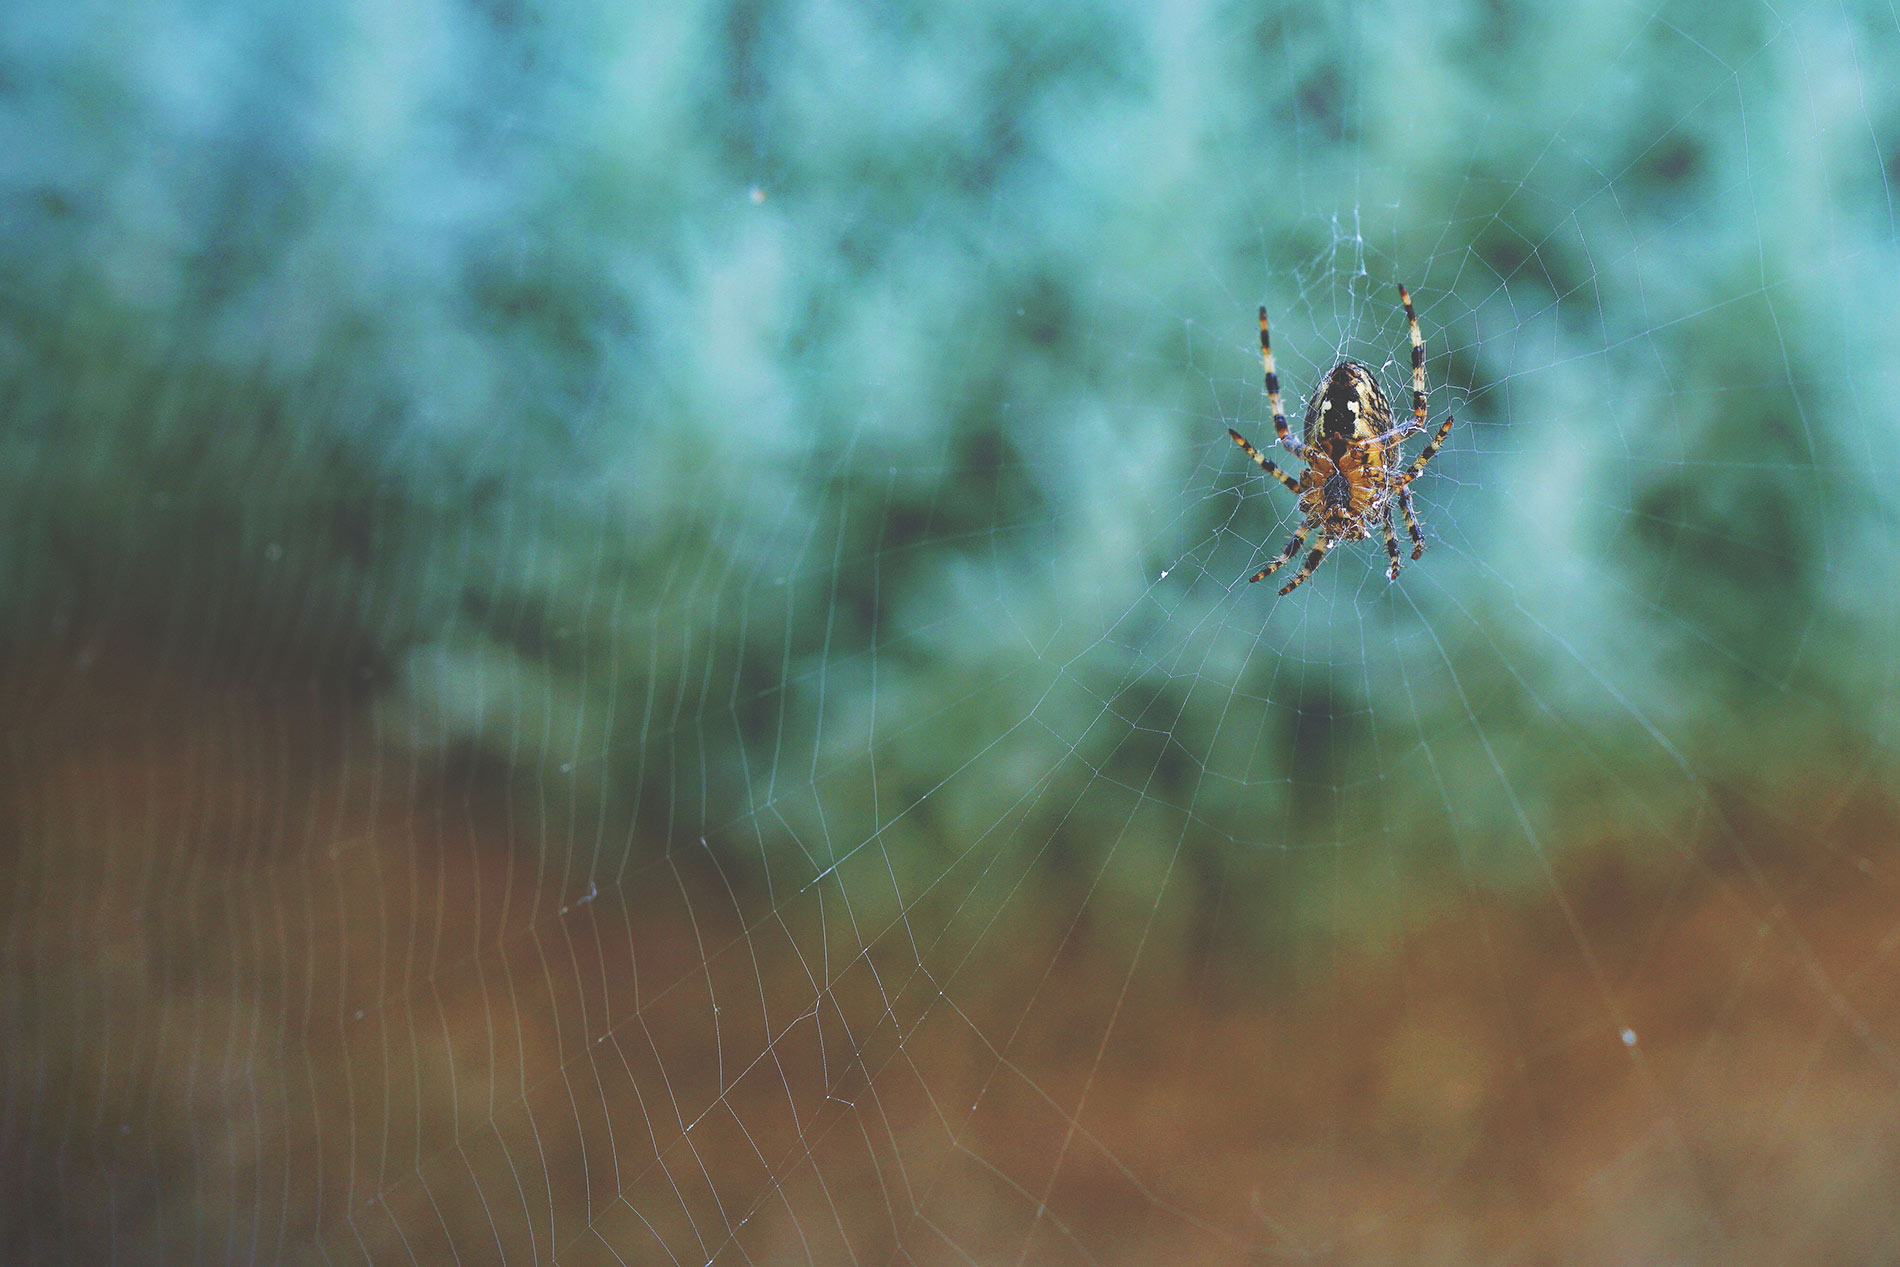 Spider on web, Beware of fly-by-nighter companies